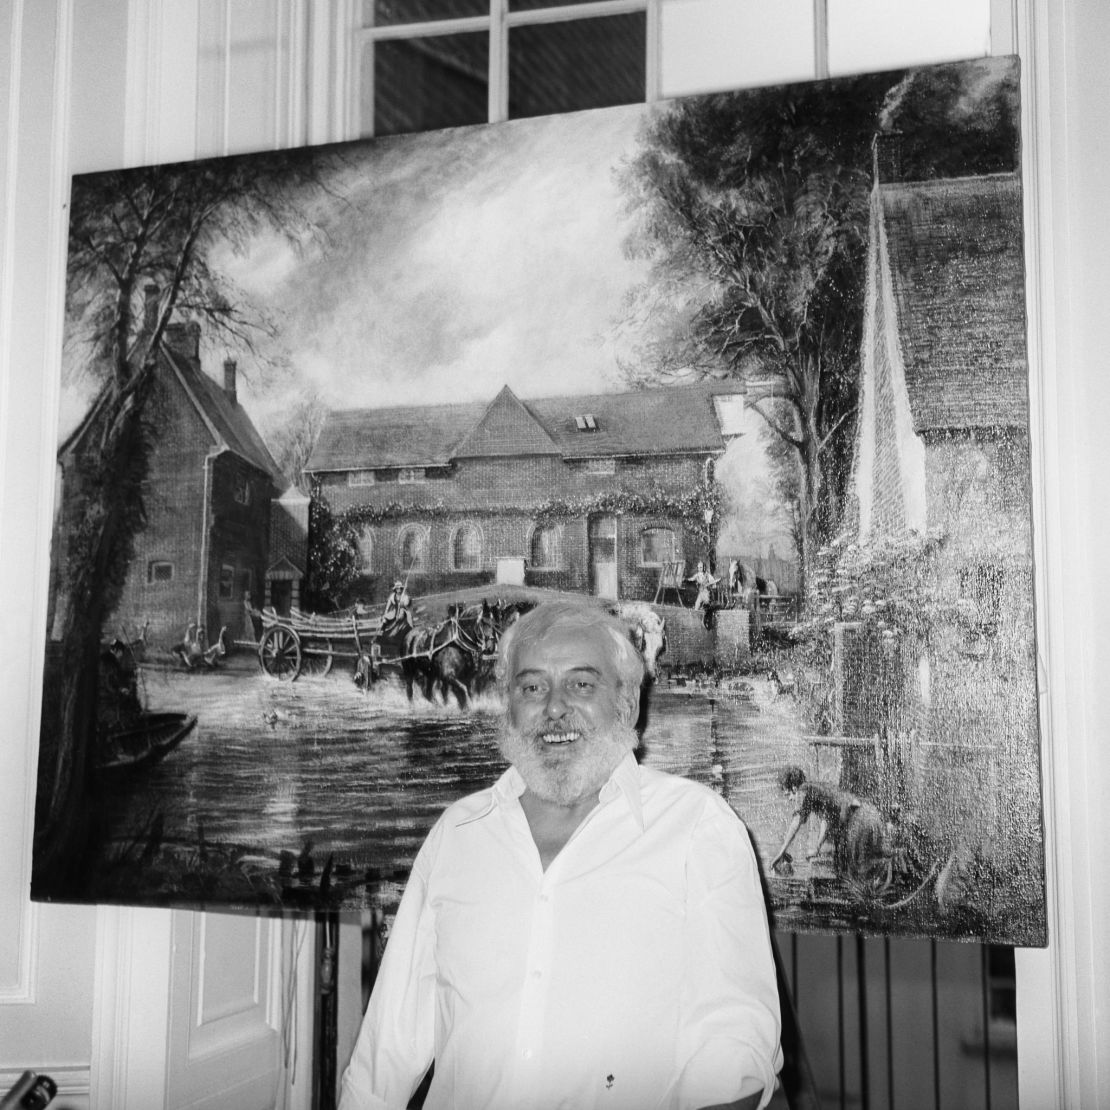 Artist Tom Keating standing in front of one of his works, his impression of Constable painting 'The Haywain', at a press conference in London. He admitted flooding the market with imitation paintings as a protest against art "merchants."